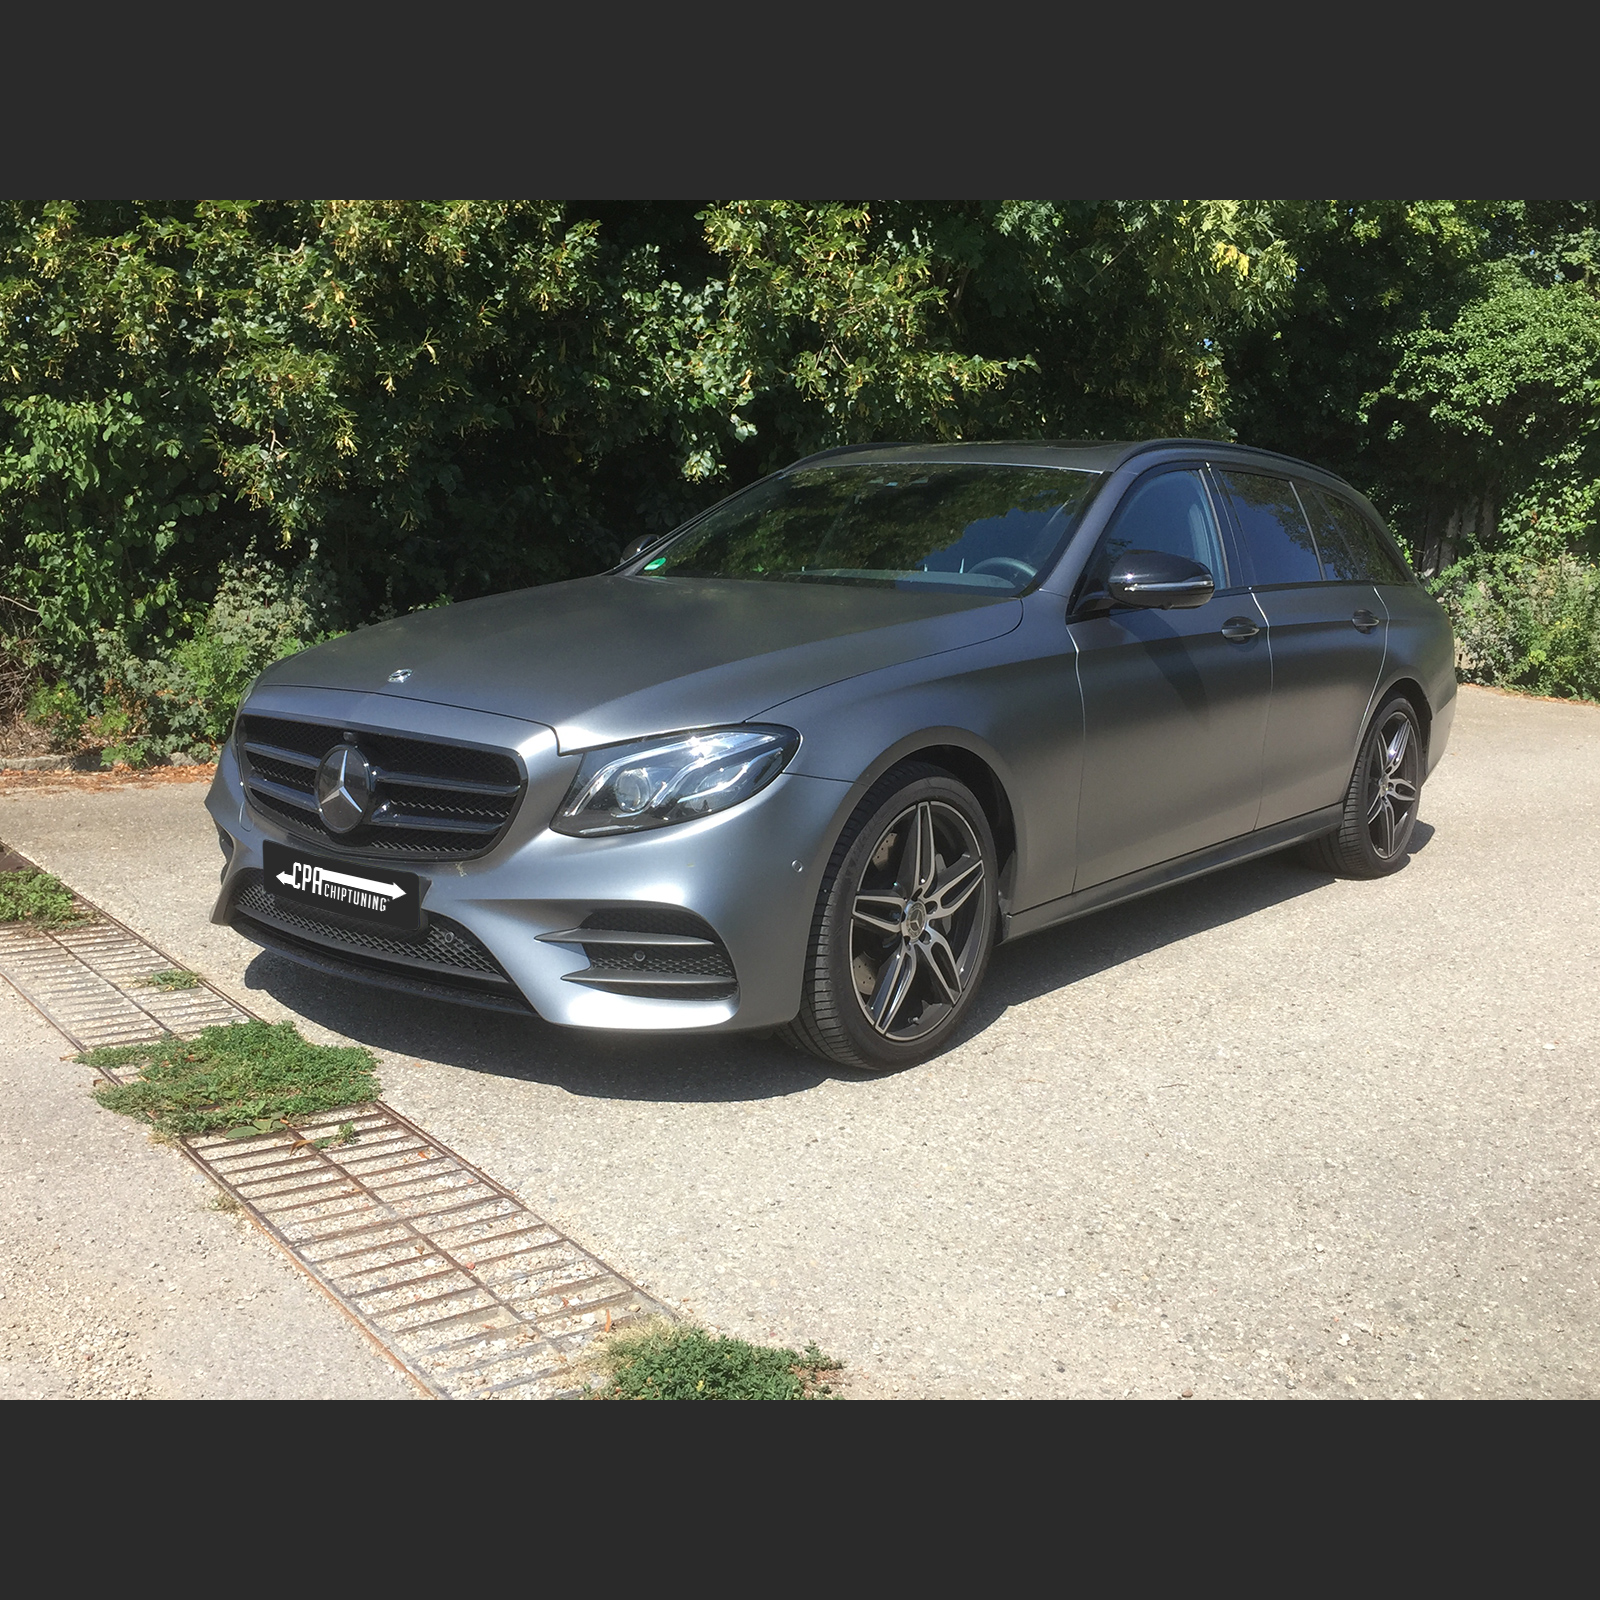 Chiptuning Mercedes tuning: The new E class in the test